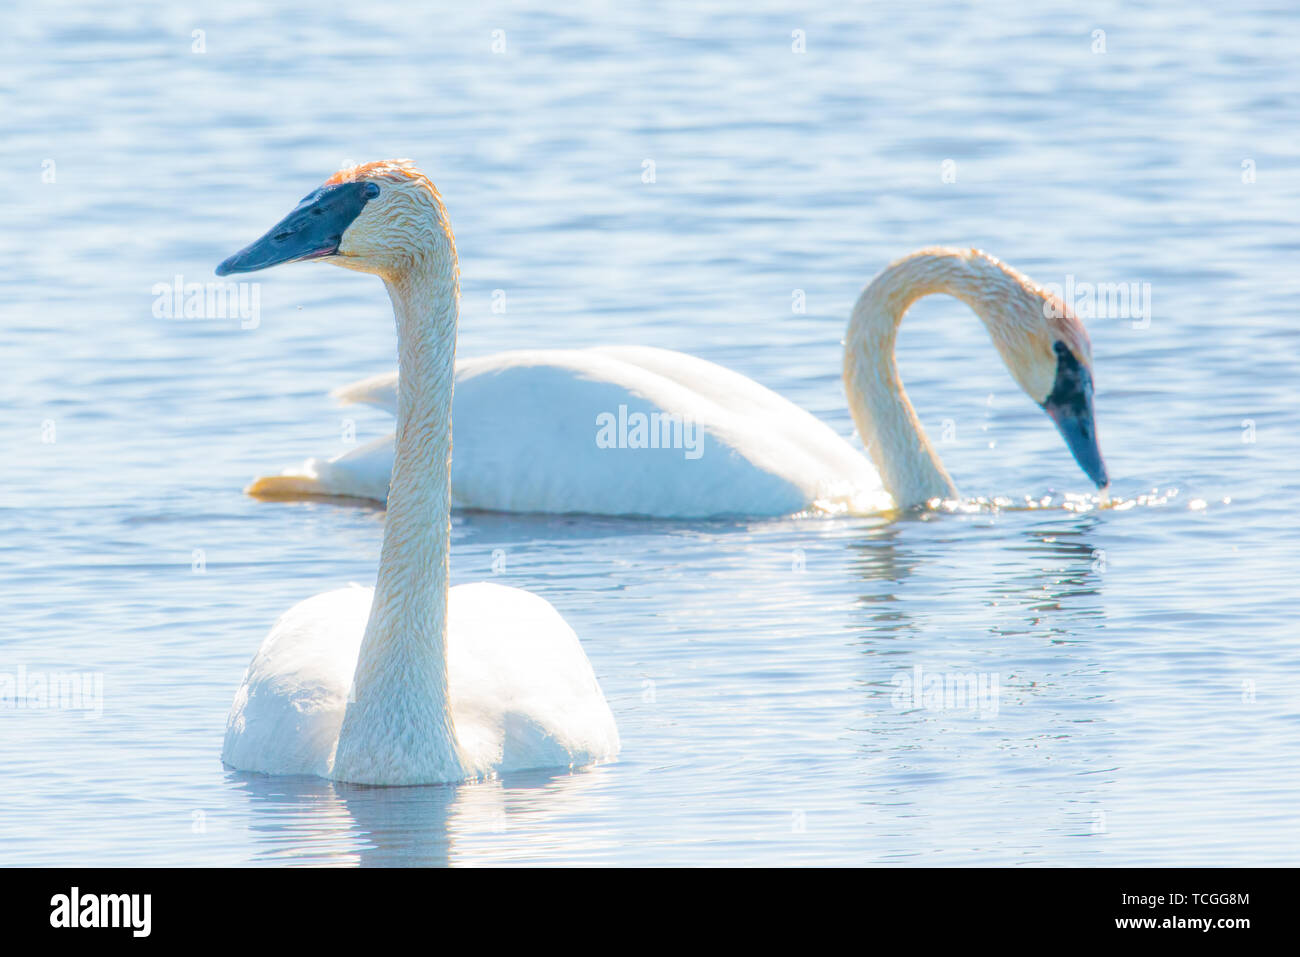 A pair of trumpeter swans - taken during Spring migrations at the Crex Meadows Wildlife Area in Northern Wisconsin Stock Photo